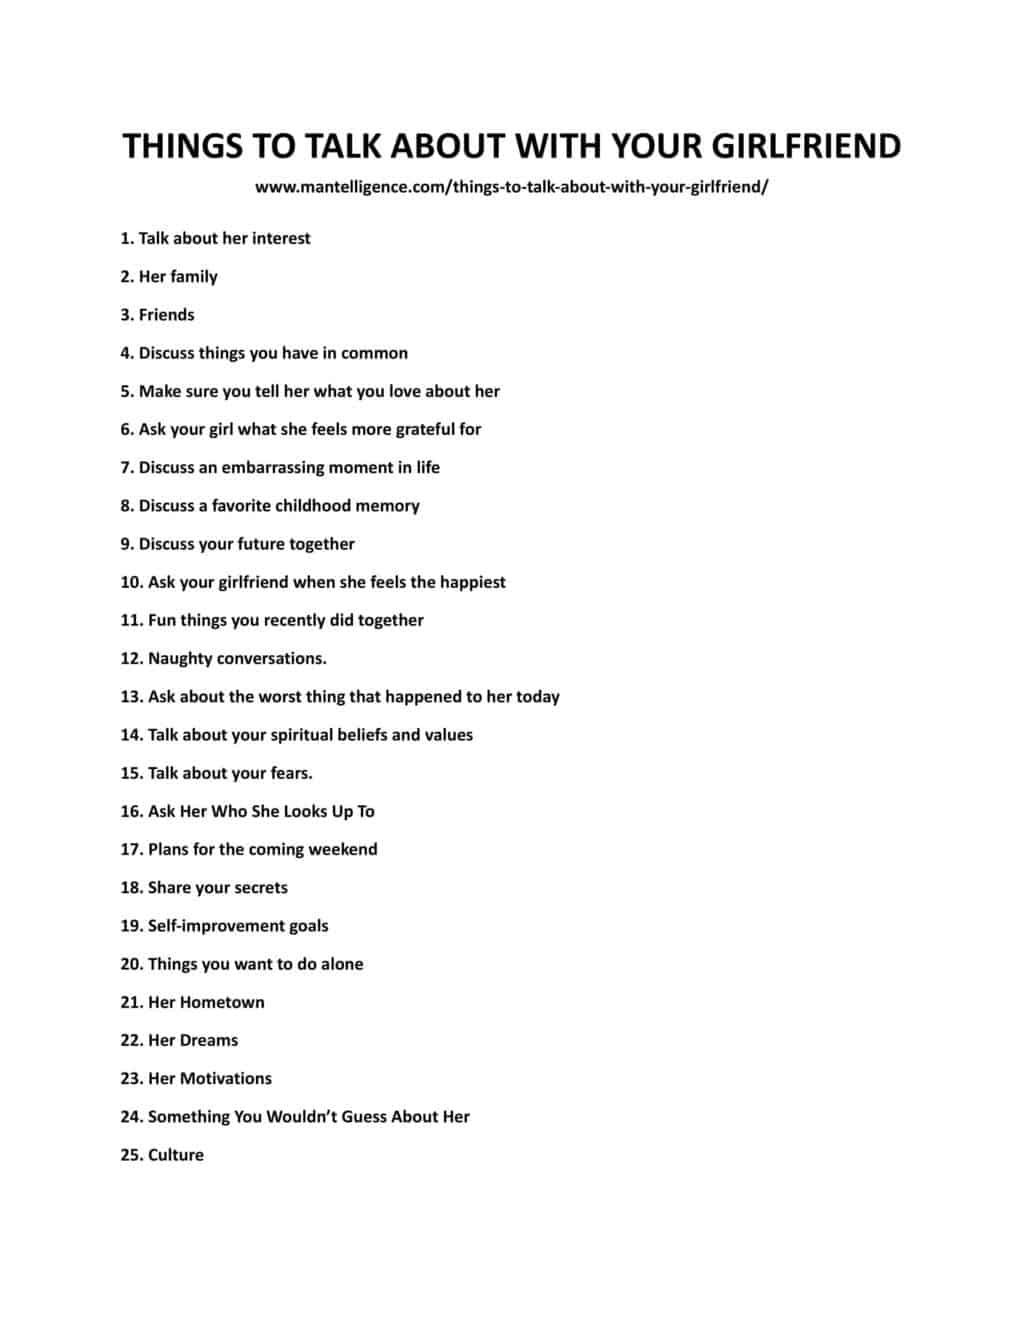 Downloadable and printable list of things to talk about with your girlfriend as jpg or pdf